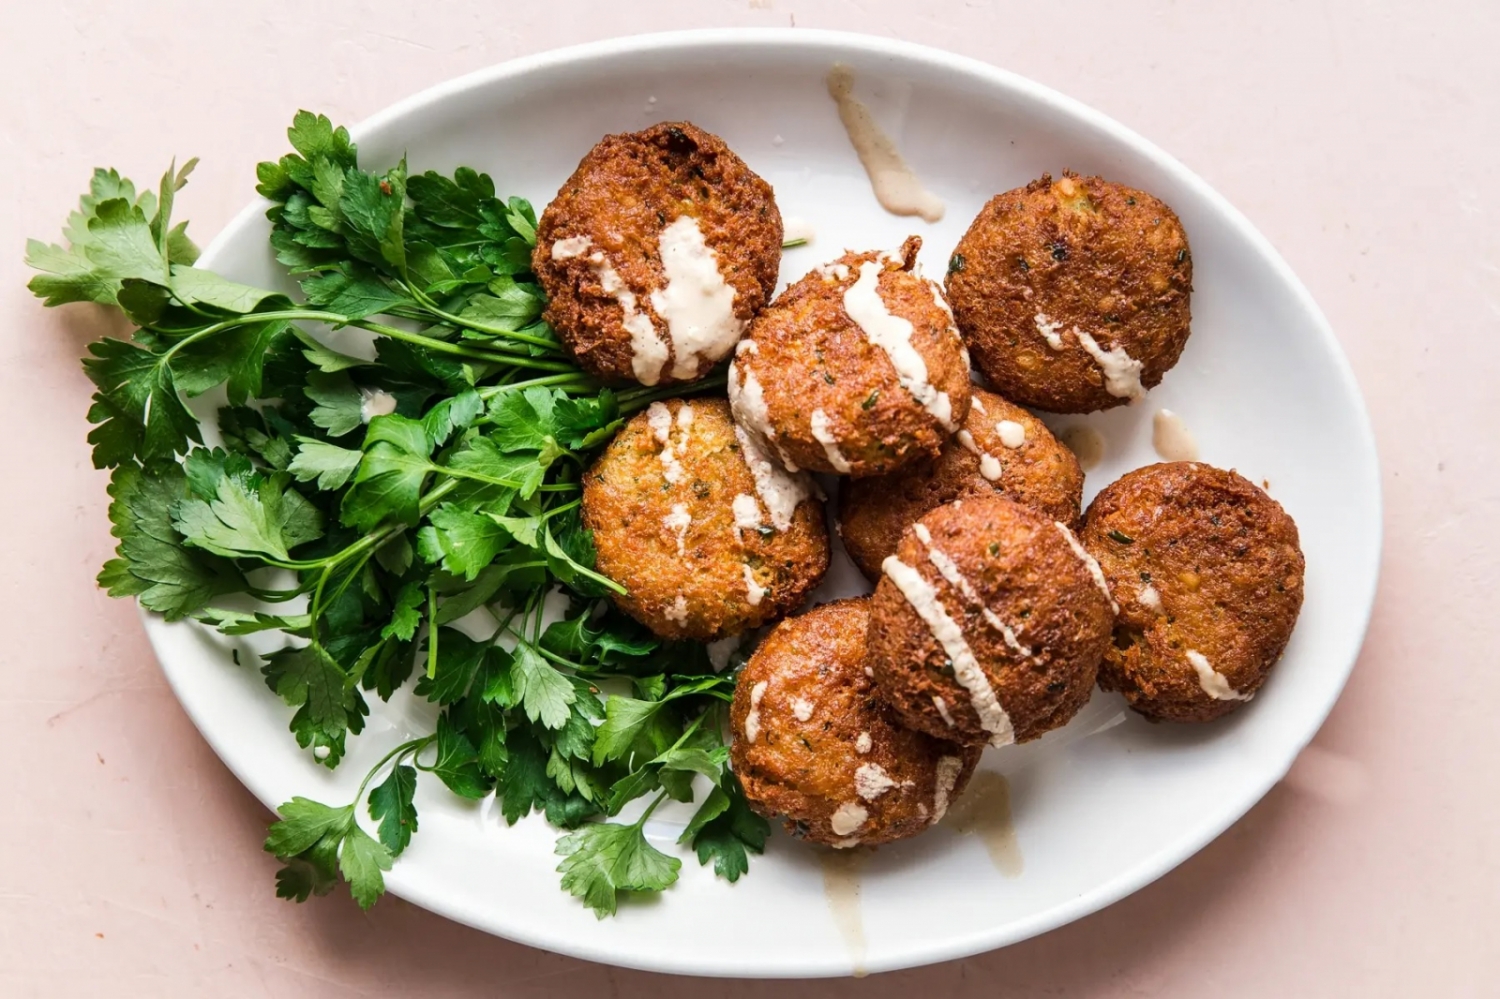 <p>Although it's recommended to use dried chickpeas for homemade falafel, <a href="https://themodernproper.com/falafel" rel="noopener">this recipe</a> proves that canned ones can still get the job done. Wonderfully flavorful and crispy, they come together in no time and will satisfy your cravings for this Middle Eastern delight every time.</p>